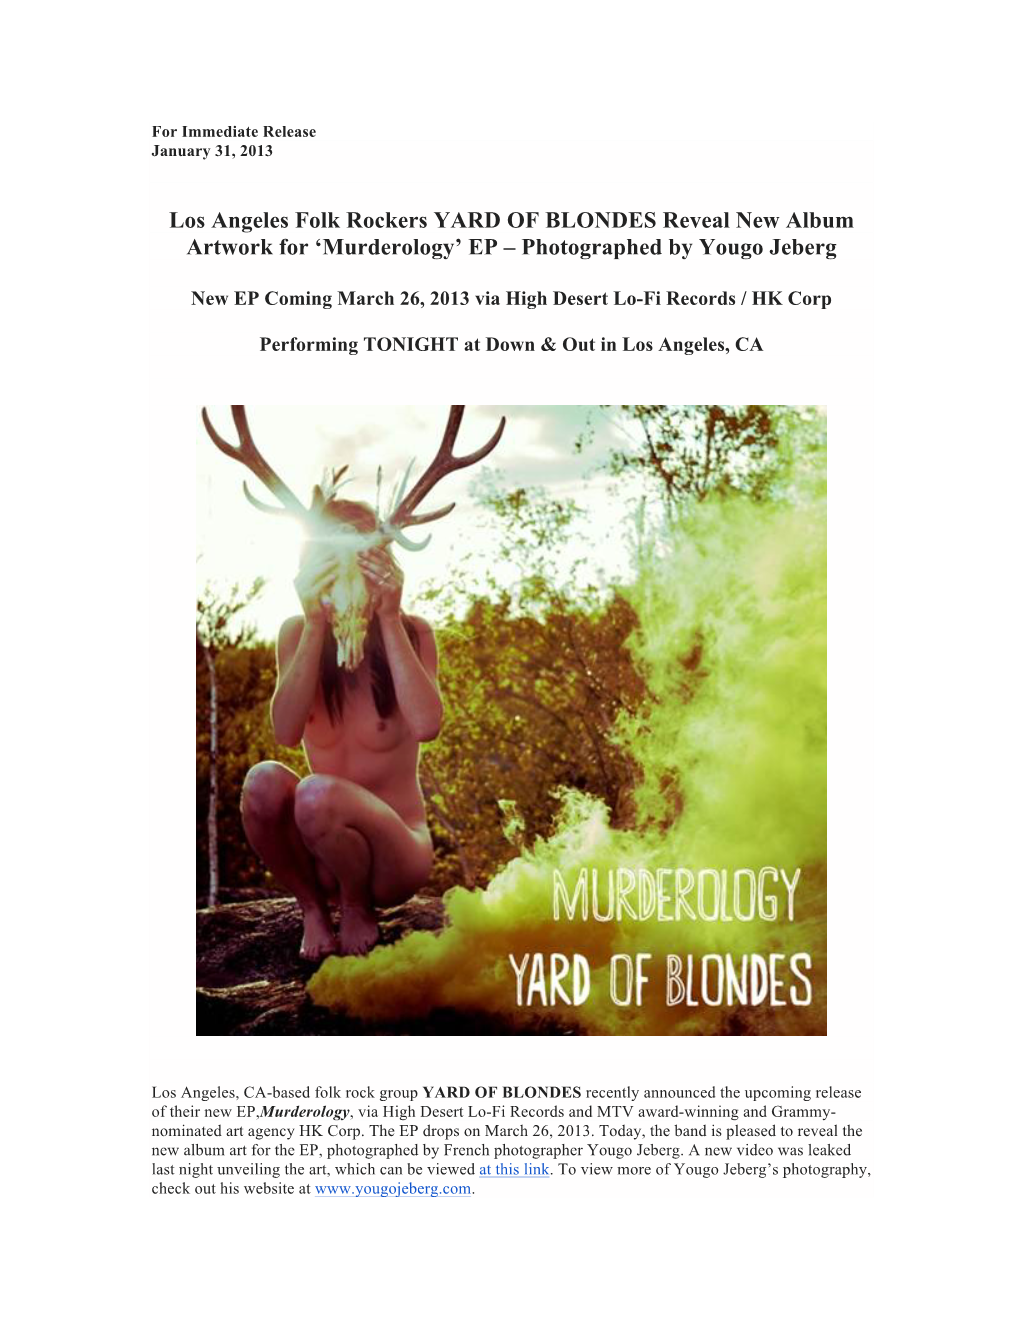 Los Angeles Folk Rockers YARD of BLONDES Reveal New Album Artwork for ‘Murderology’ EP – Photographed by Yougo Jeberg